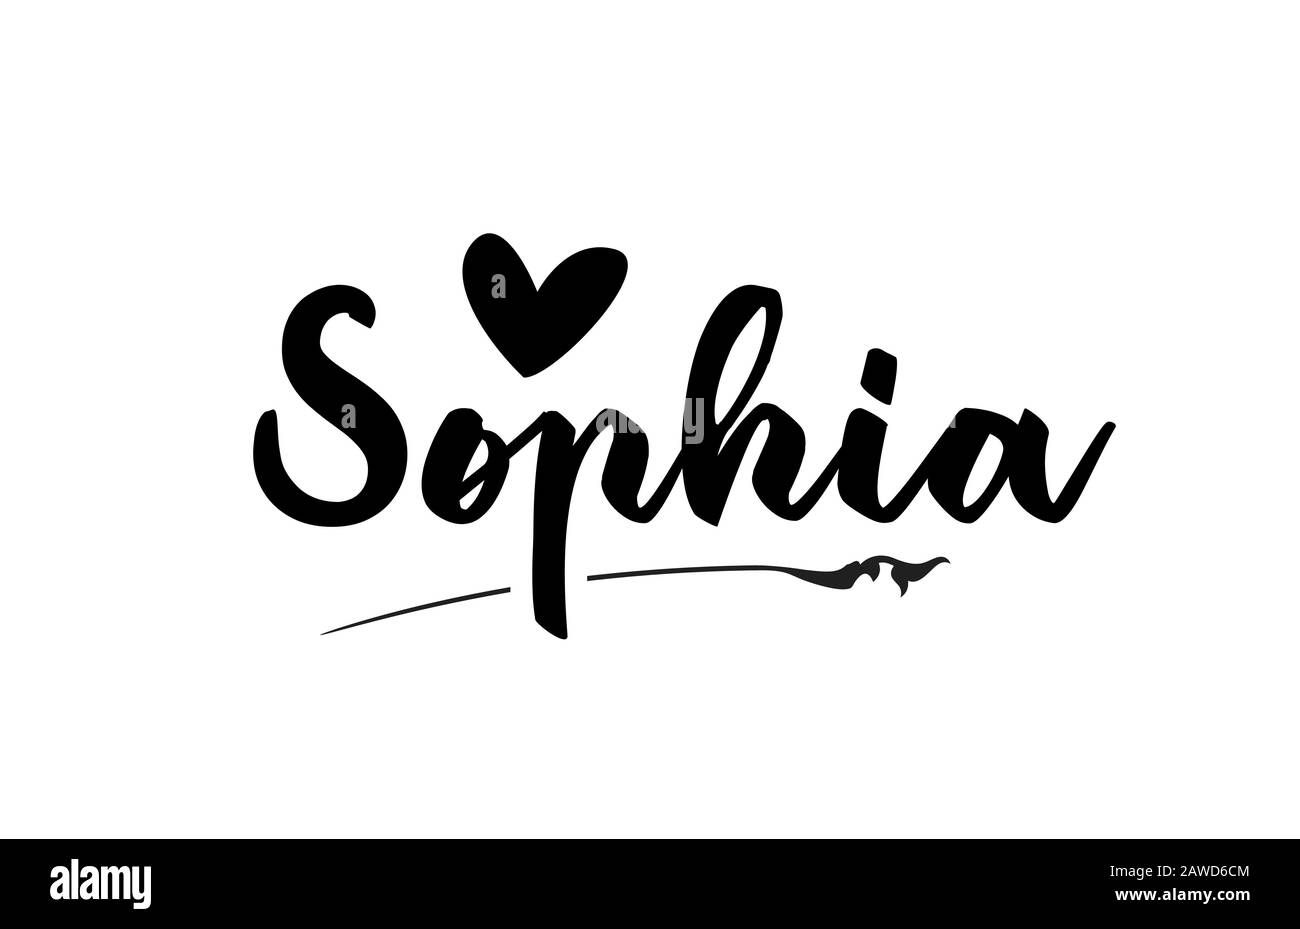 Sophia Name Text Word With Love Heart Hand Written For Logo Typography Design Template Can Be Used For A Business Logotype Stock Vector Image Art Alamy